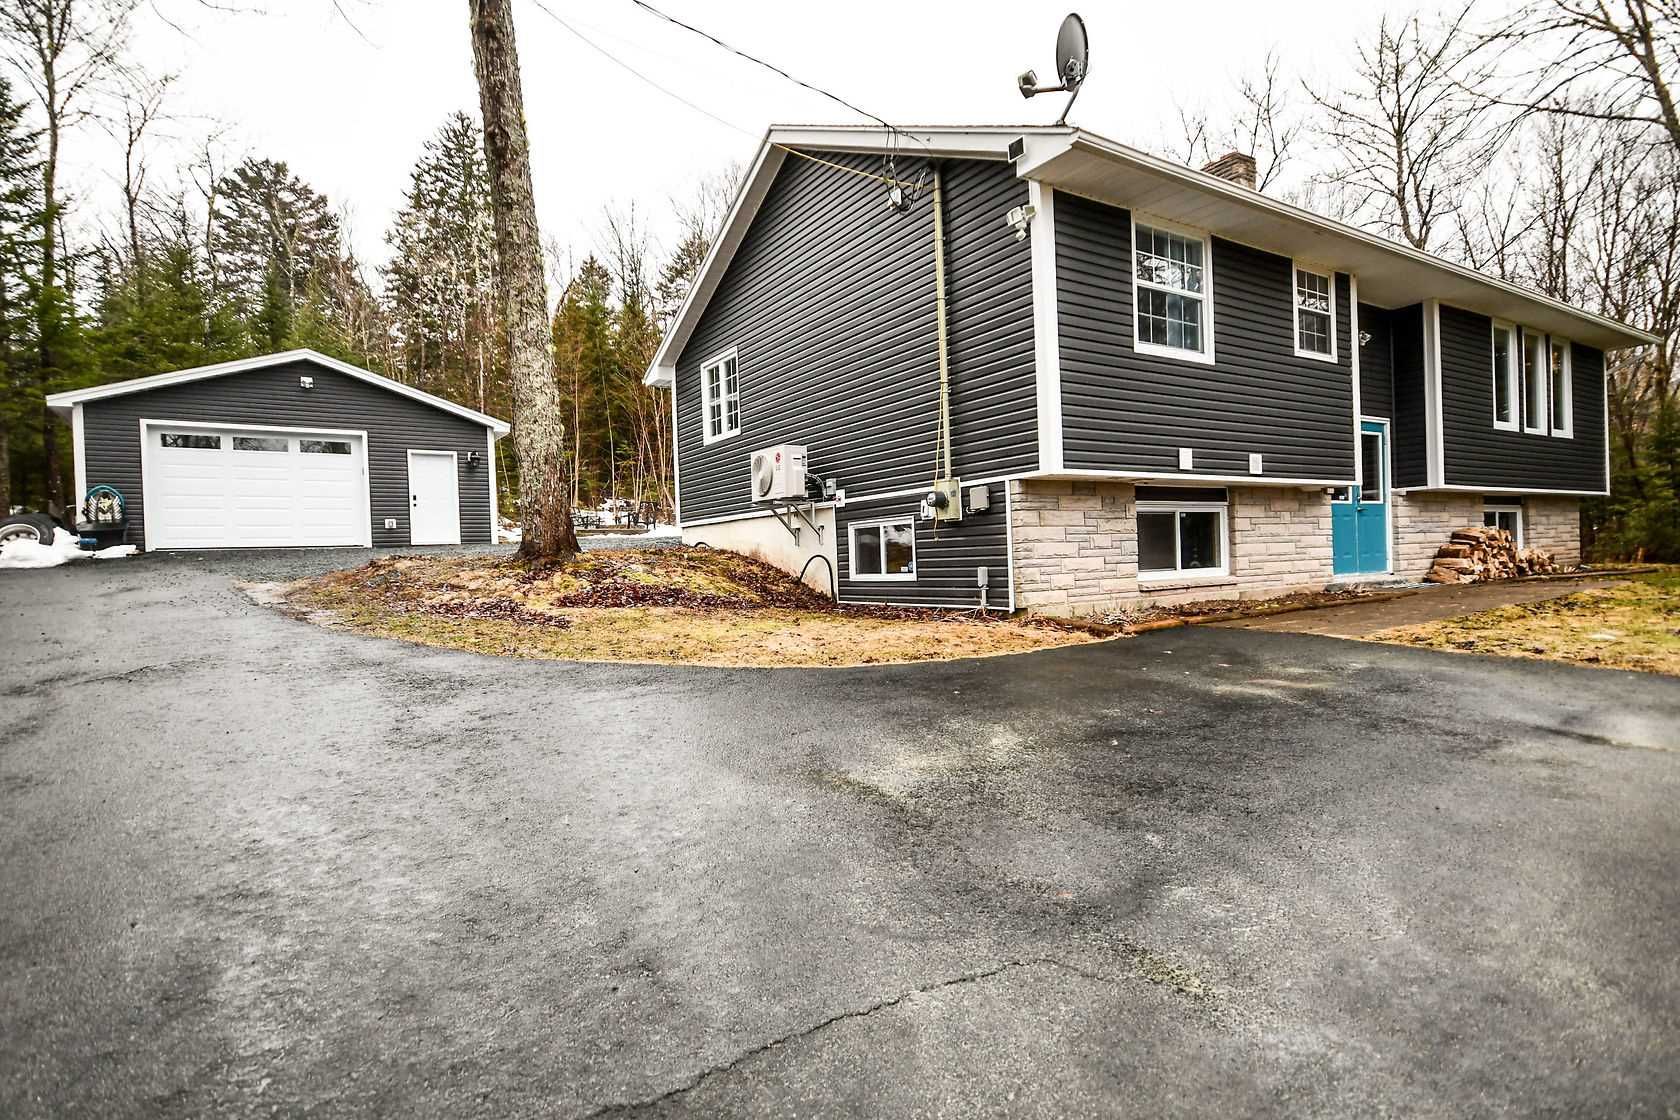 Main Photo: 28 Lakemist Court in East Preston: 31-Lawrencetown, Lake Echo, Porters Lake Residential for sale (Halifax-Dartmouth)  : MLS®# 202105359